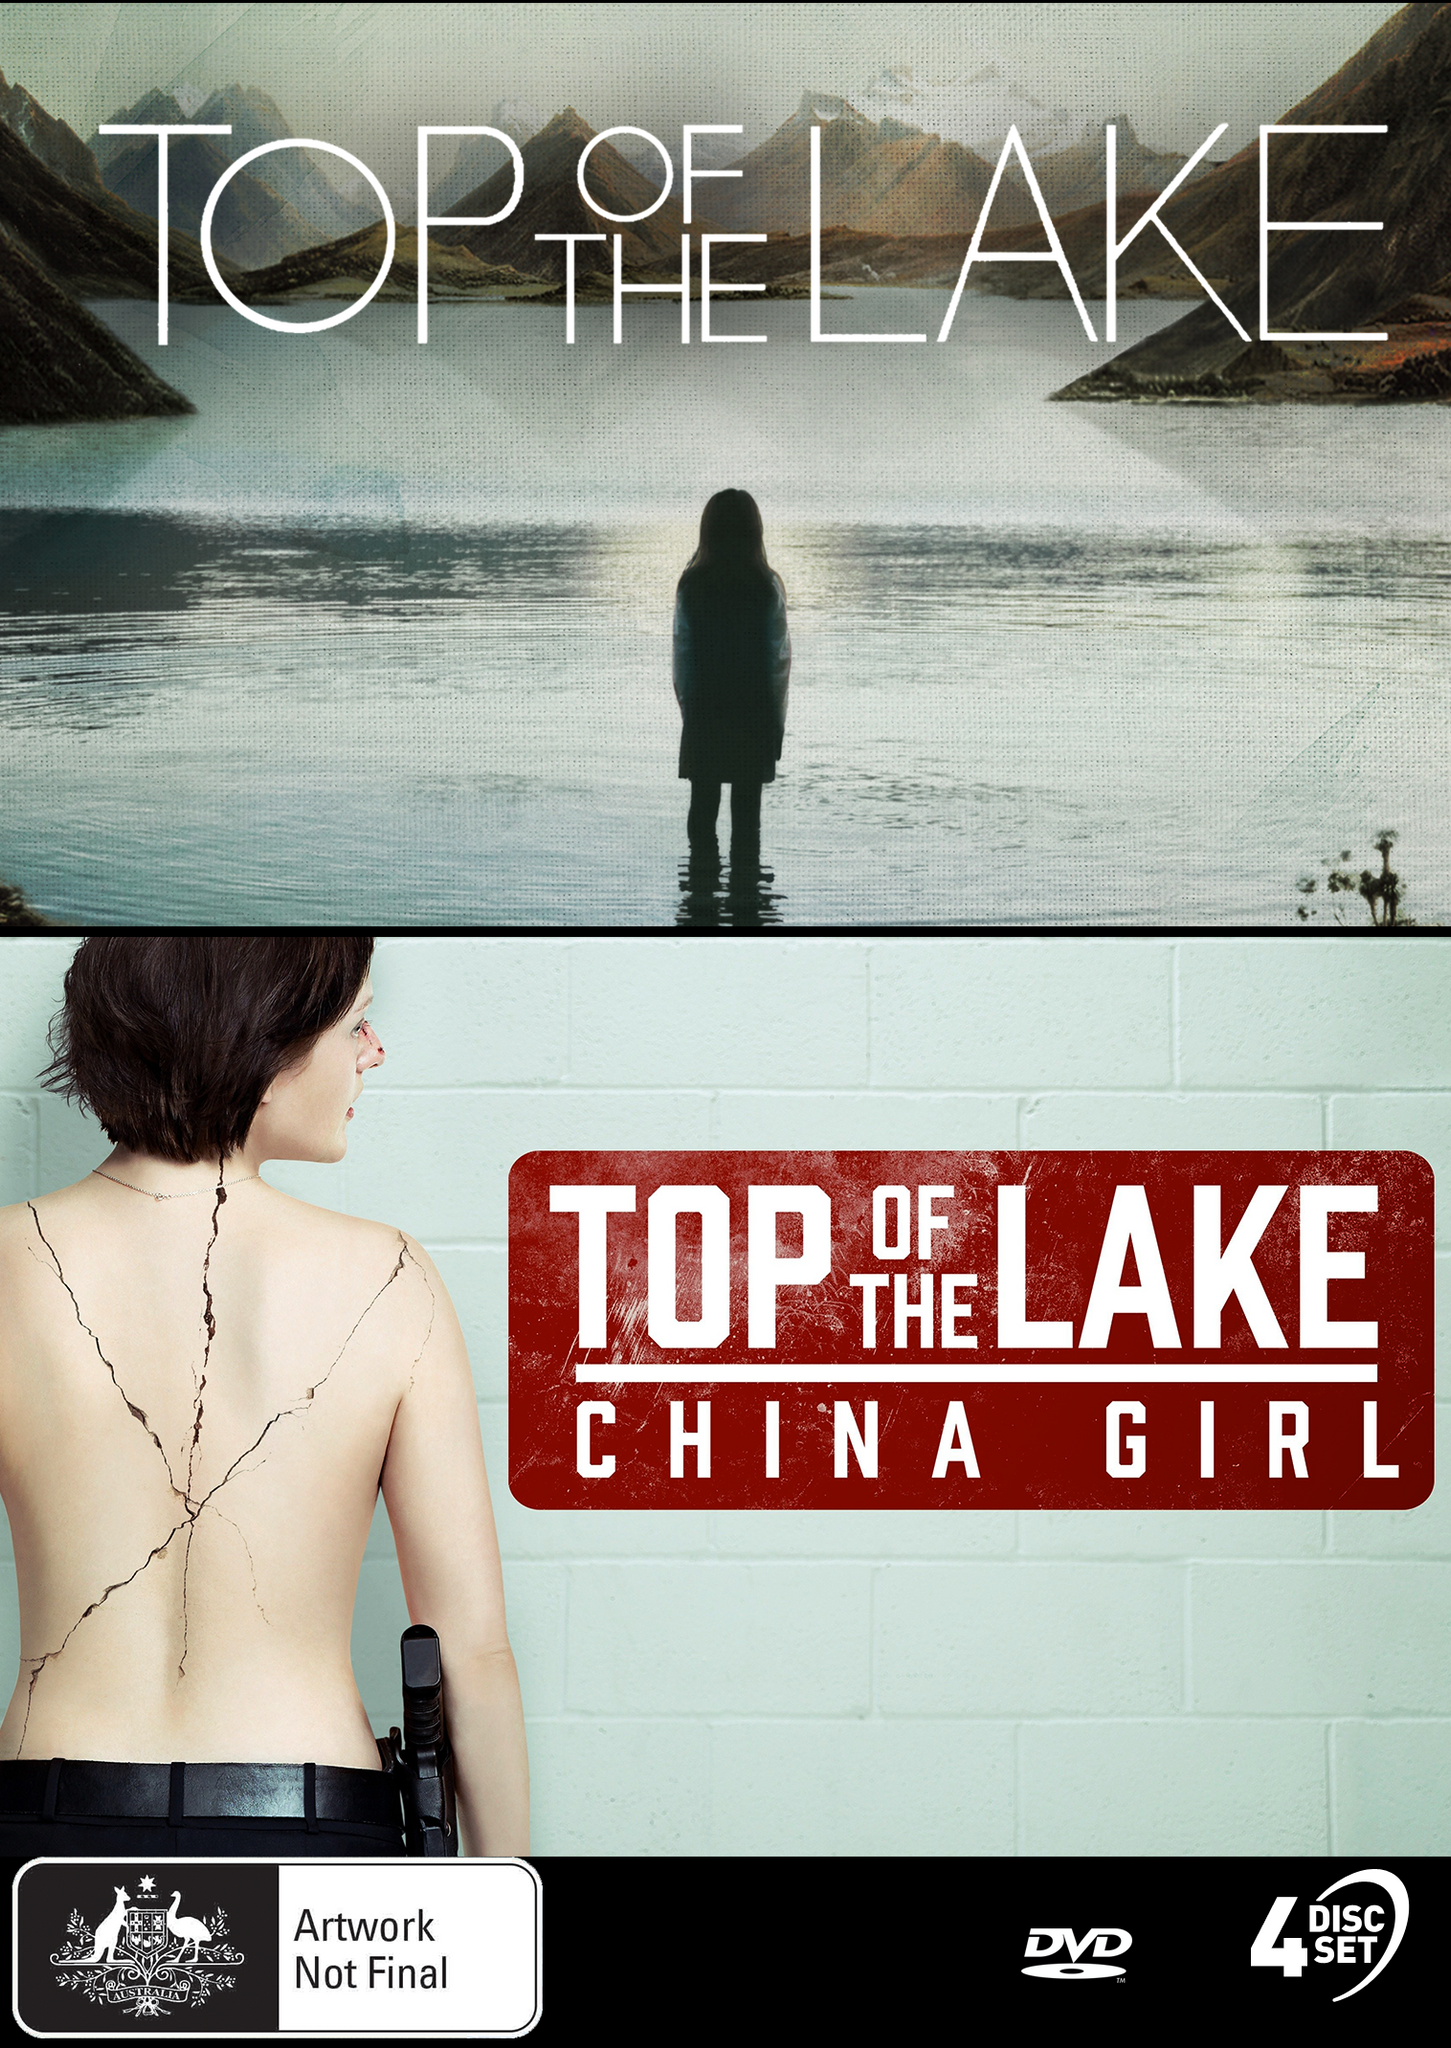 TOP OF THE LAKE: THE COMPLETE COLLECTION (S1 & S2: TOP OF THE LAKE: CHINA GIRL)